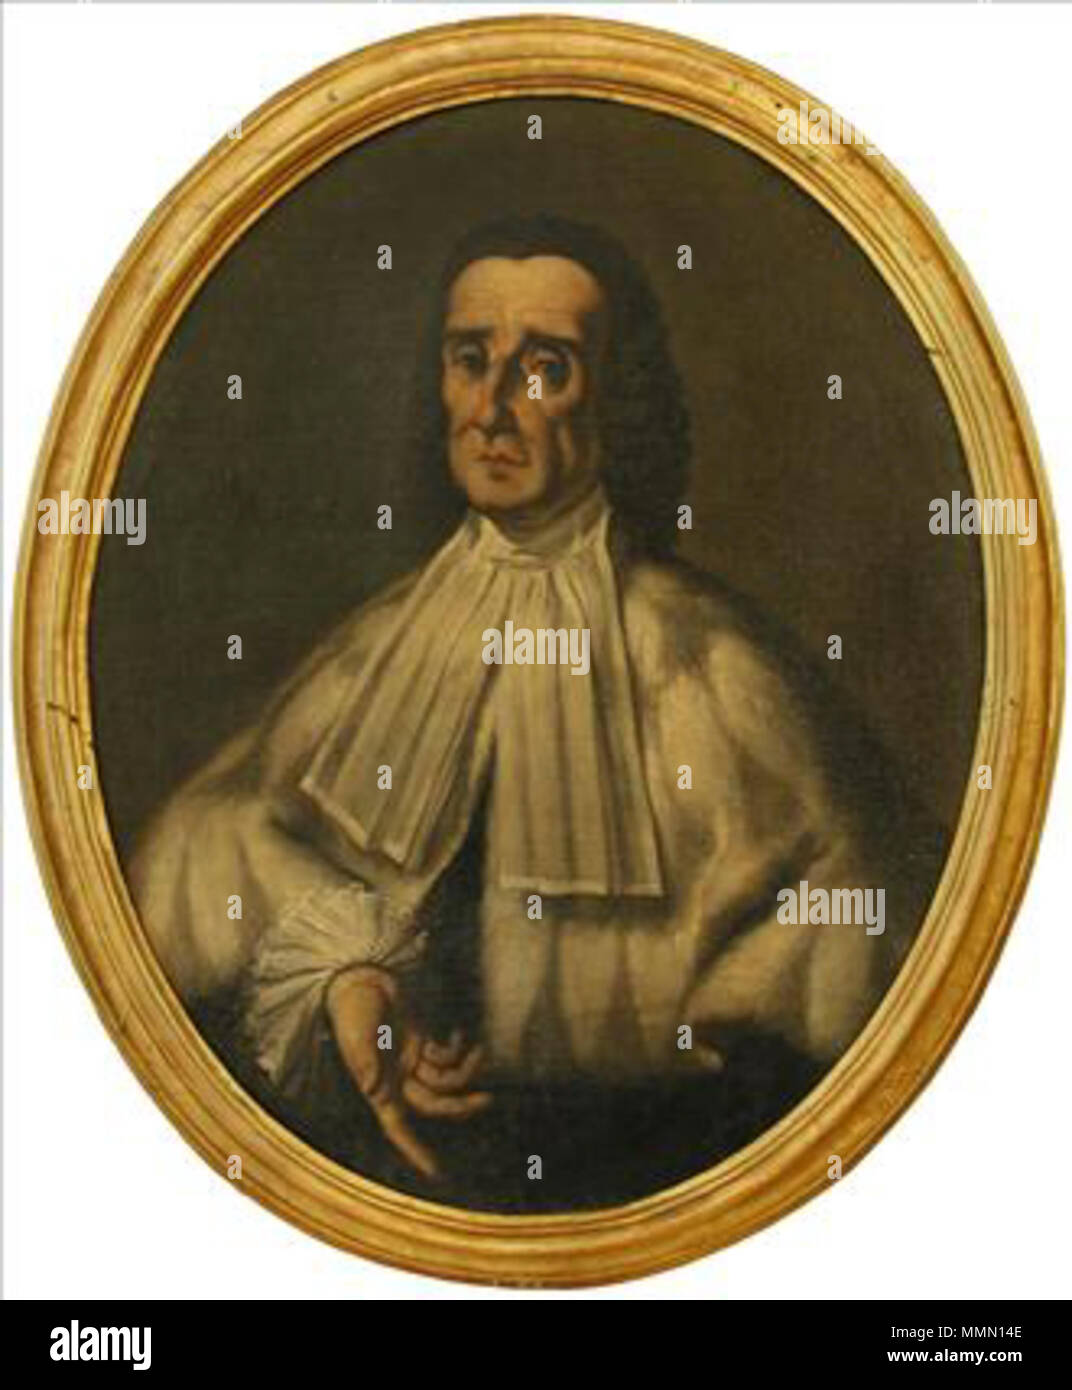 . English: Jacopo Bartolomeo Beccari (25 July 1682 - 18 January 1766 ), an Italian chemist, one of the leading scientists in Bologna in the first half of the eighteenth century. He is mainly known as the discoverer of the gluten in wheat flour.  . before 1767. University of Bologna 73 Bartolomeo Beccari Stock Photo